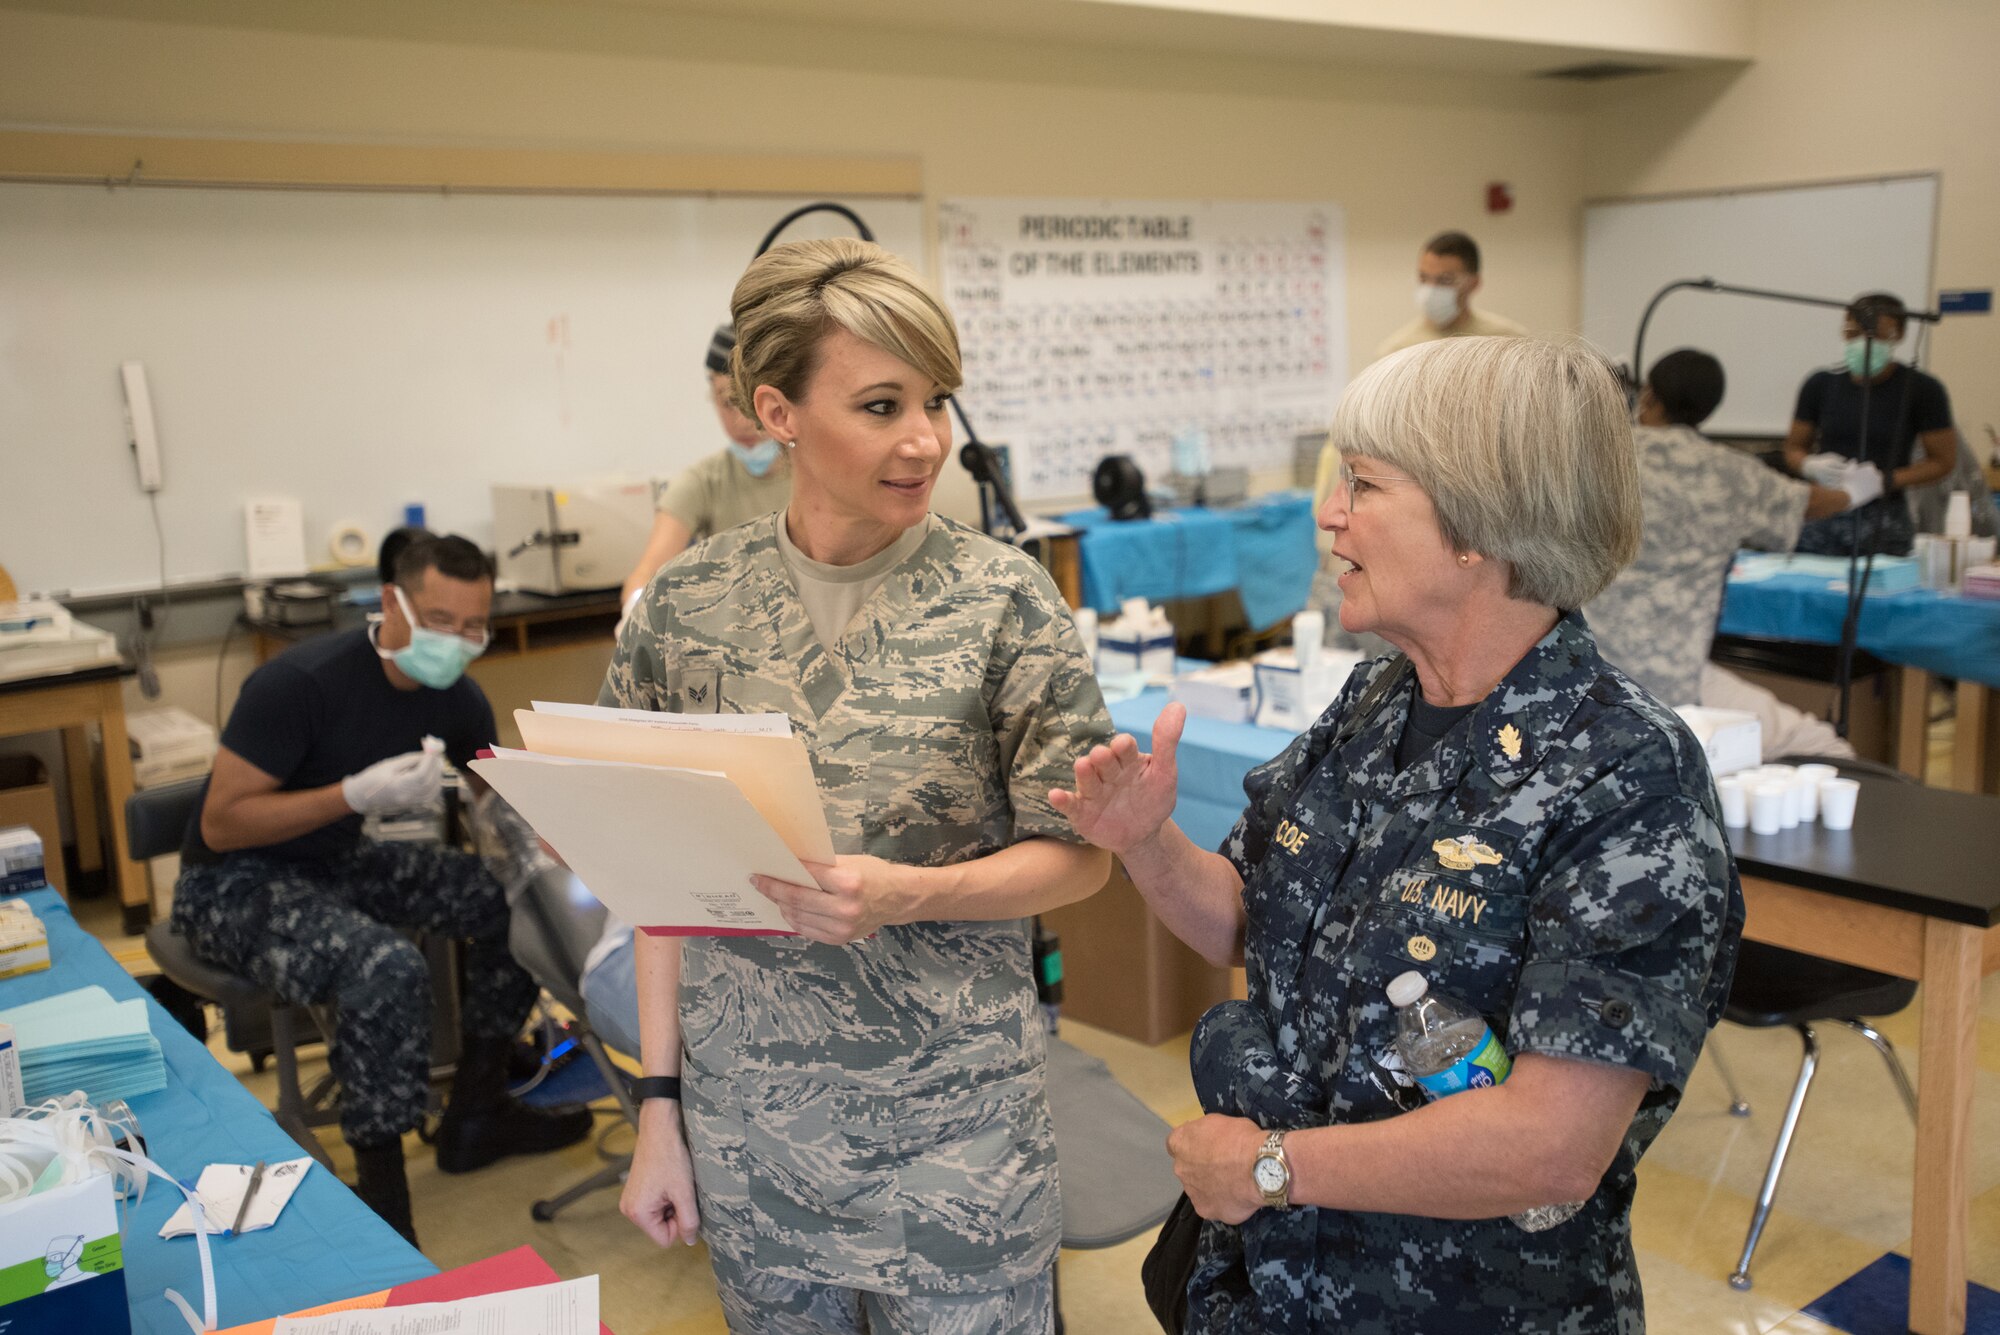 U.S. Navy Rear Adm. Priscilla Coe, deputy chief of staff for the U.S. Navy Bureau of Medicine and Surgery and deputy chief of the Navy Reserve Dental Corps, speaks with U.S. Air Force Senior Airman Kristin Bentley, a dental assistant from the Utah Air National Guard’s 151st Medical Group, about dental care being provided to patients at Paducah Tilghman High School in Paducah, Ky., on July 23, 2016, as part of Bluegrass Medical Innovative Readiness Training. The Kentucky Air National Guard, U.S. Navy Reserve and other military units are teaming with the Delta Regional Authority to offer medical and dental care at no cost to residents in Paducah and two other Western Kentucky locations from July 18 to 27 as part of the training event. (U.S. Air National Guard photo by Master Sgt. Phil Speck)